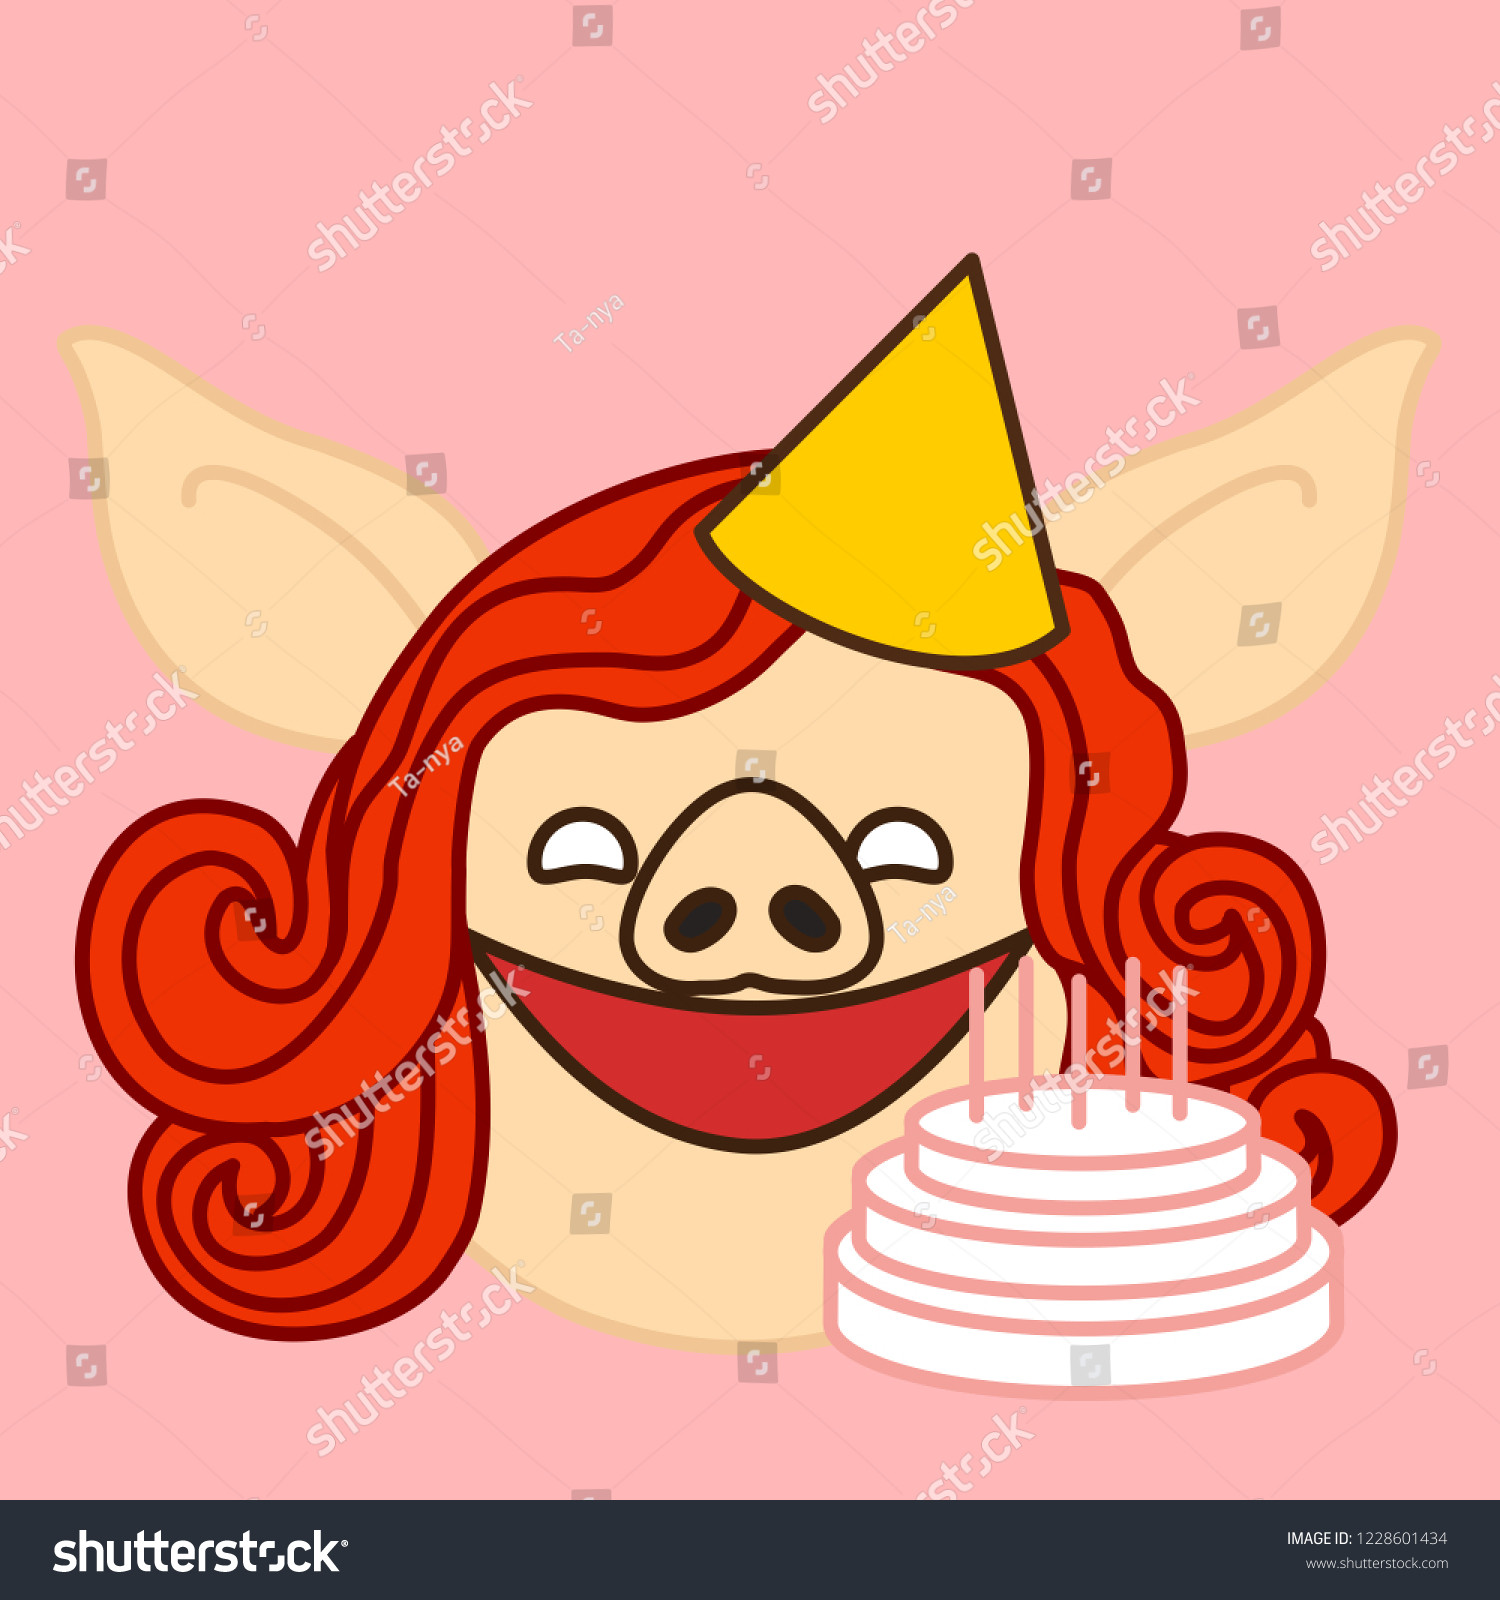 stock vector emoji with smiling pig woman celebrating her happy birthday in party hat with cake and candles